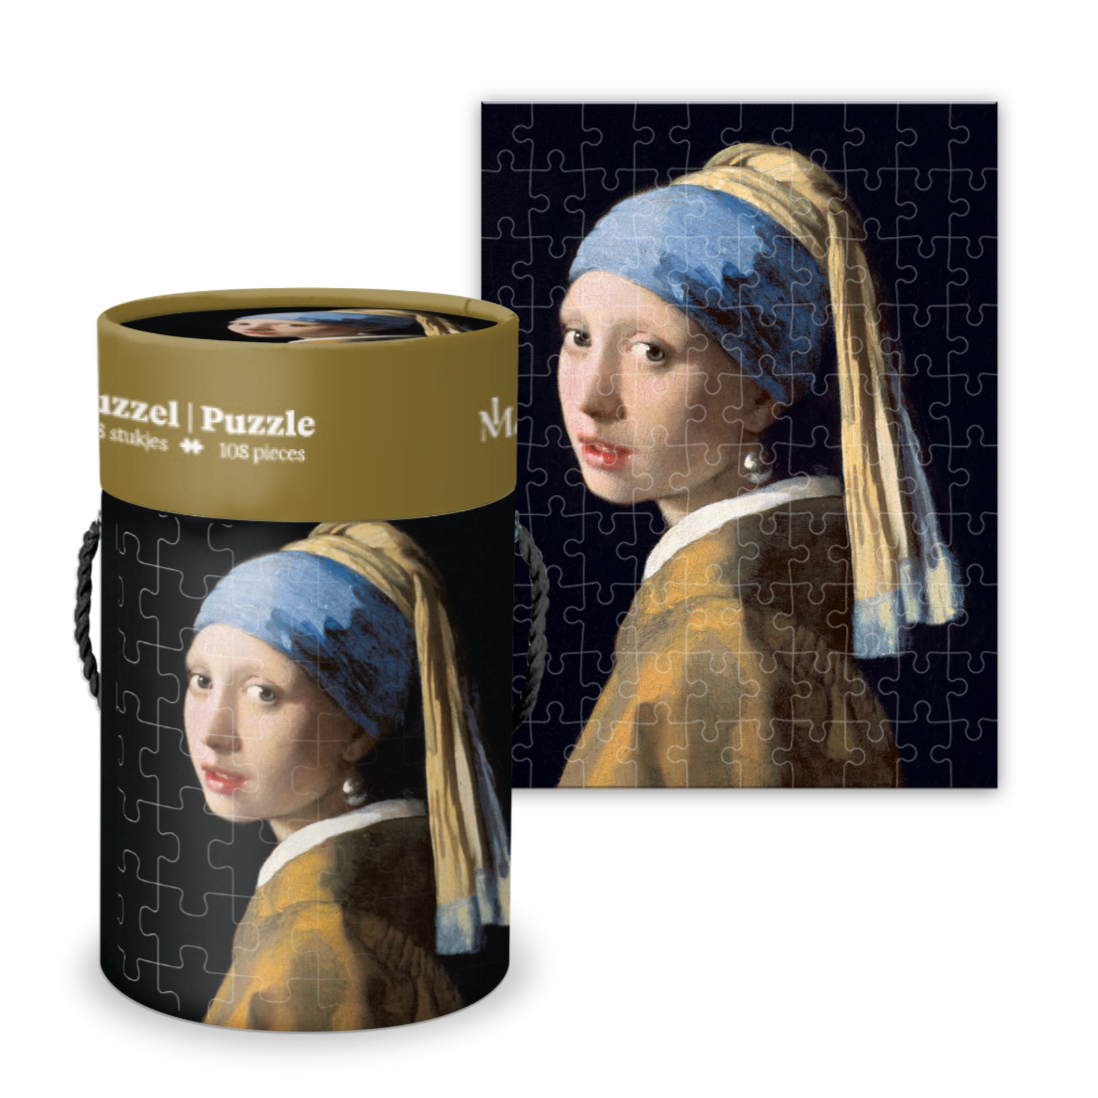 Puzzle Tube - Vermeer Girl with a Pearl Earring